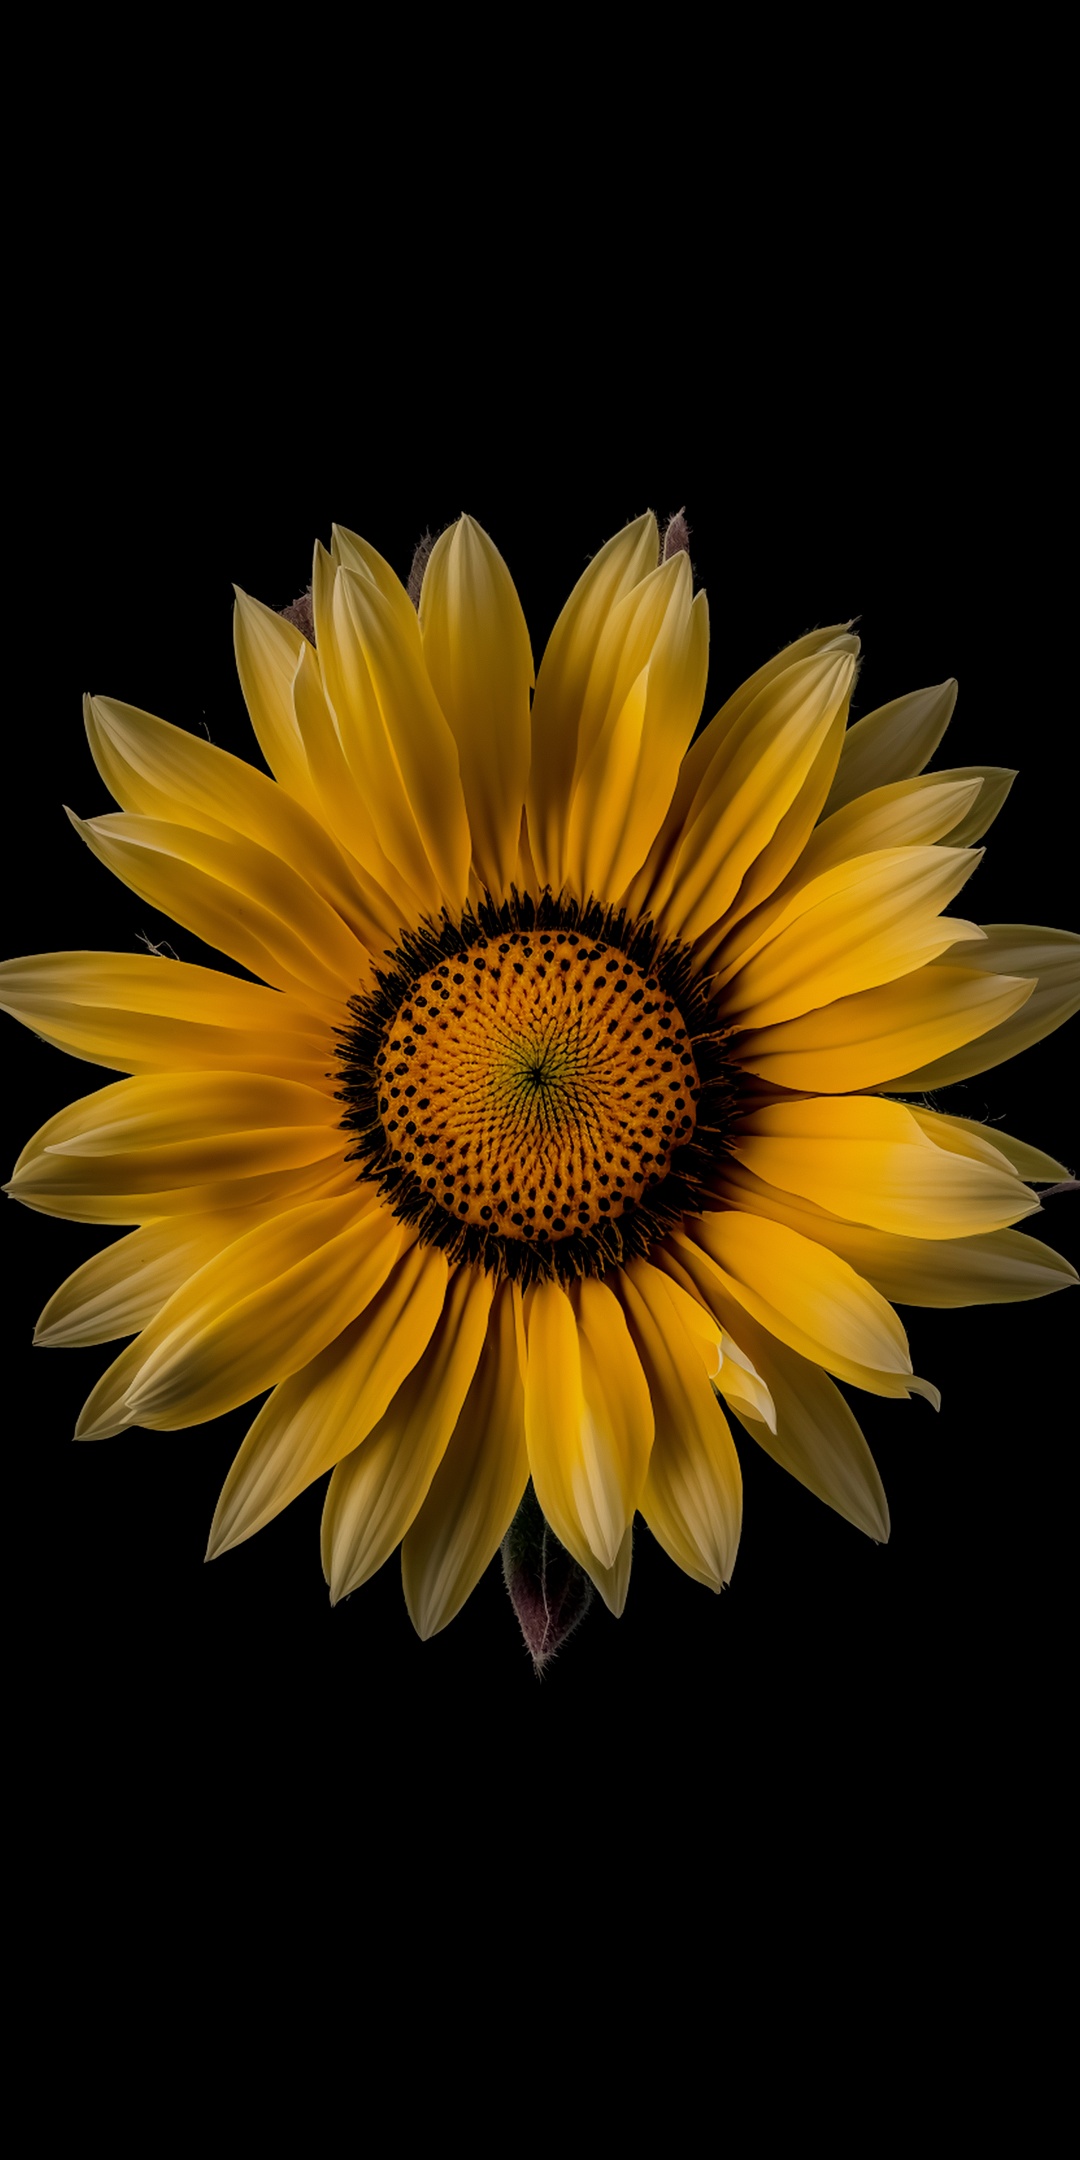 50+ Sunflower Wallpaper Backgrounds to Download Free For Your iPhone